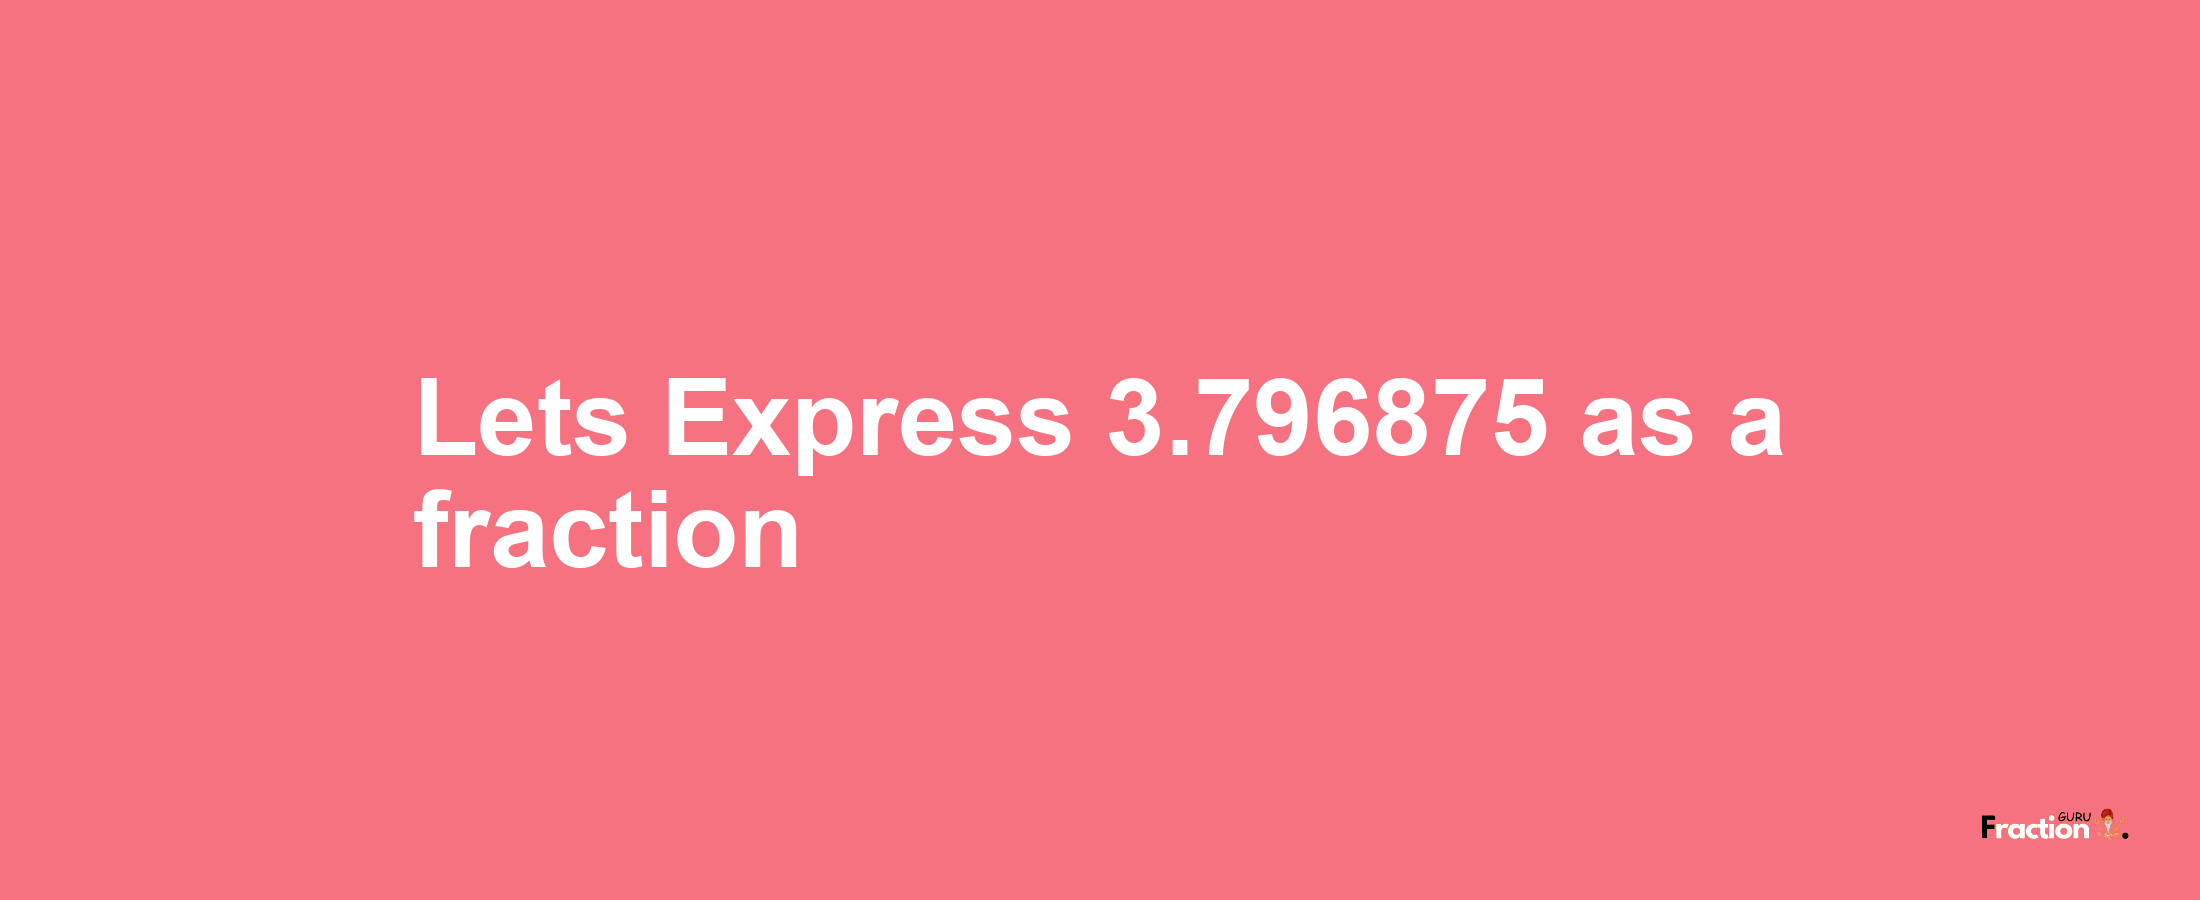 Lets Express 3.796875 as afraction